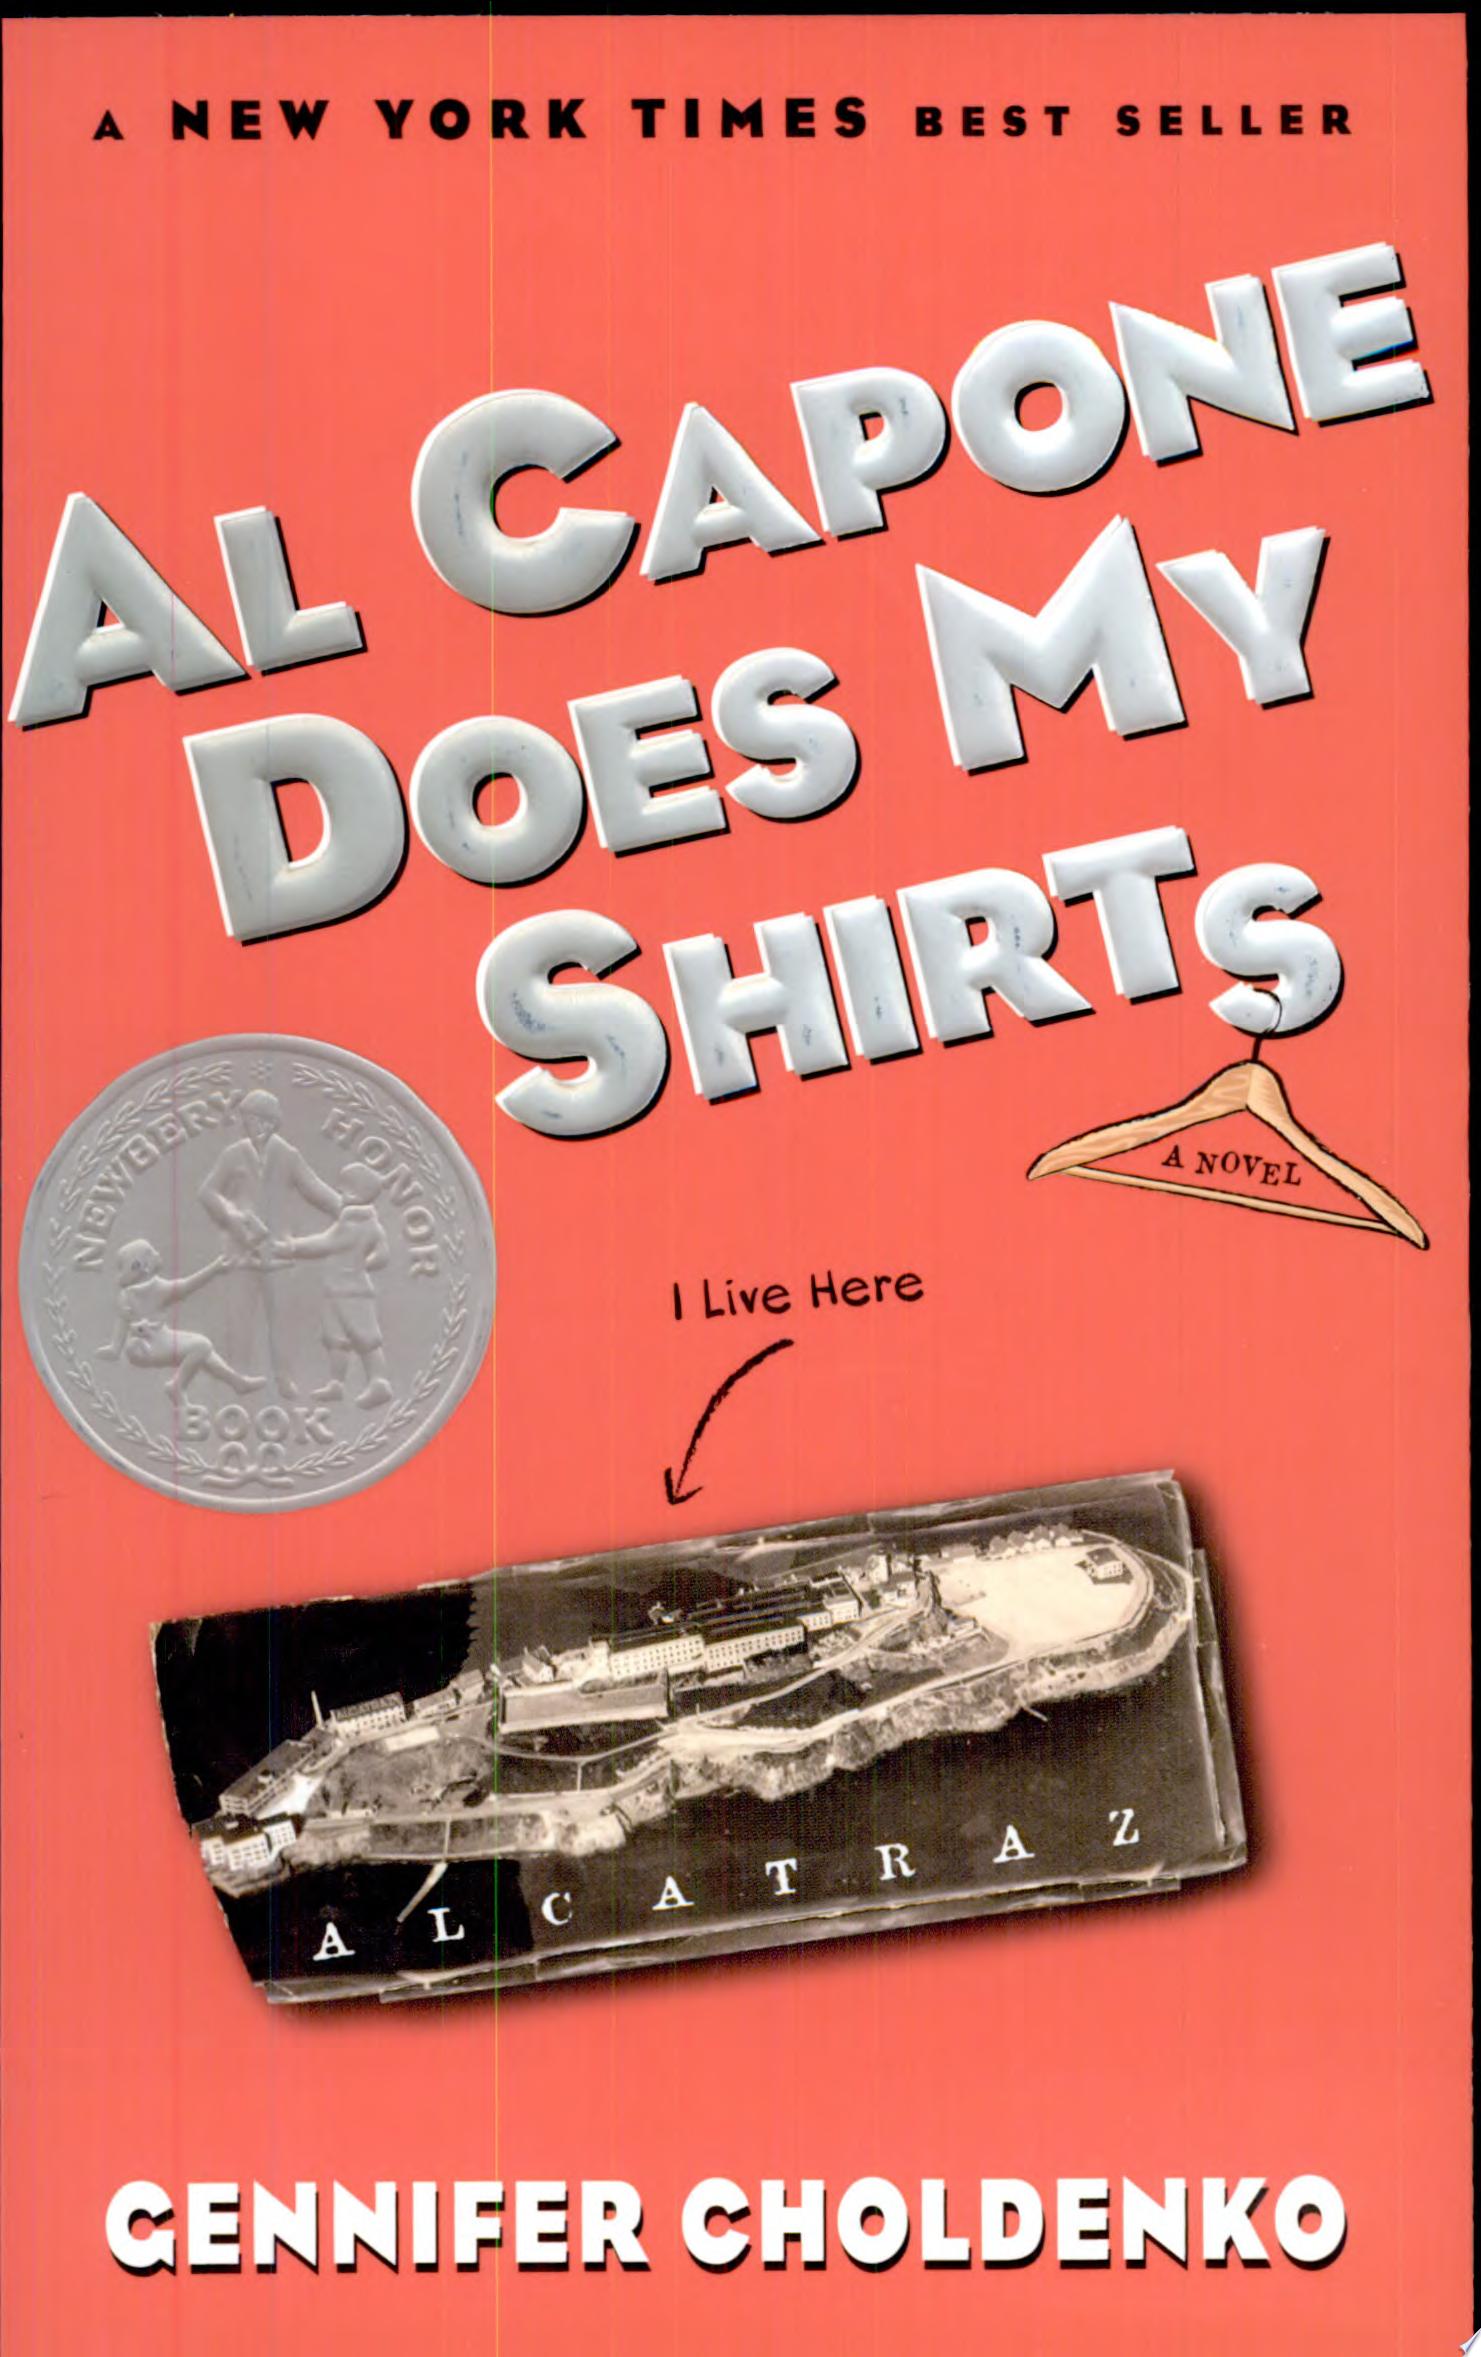 Image for "Al Capone Does My Shirts"